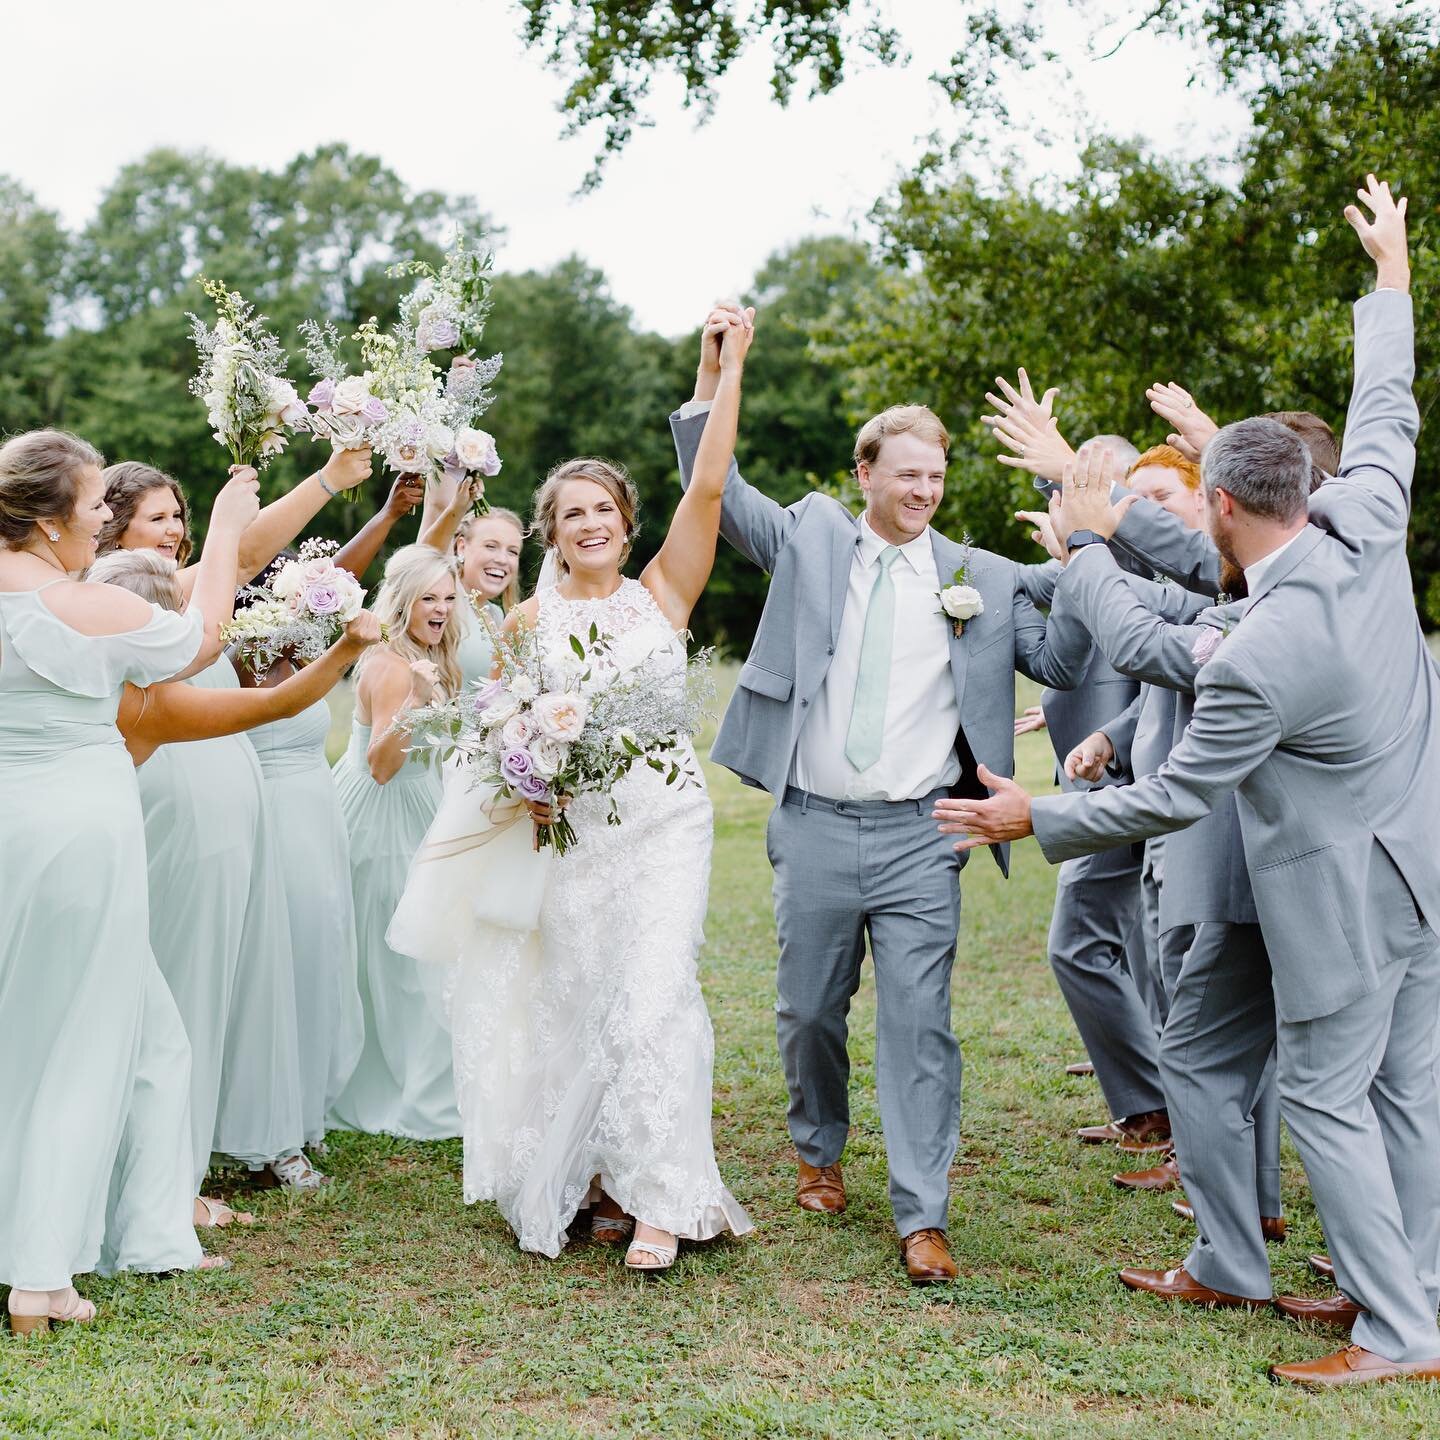 S &amp; T ✨ part two! Getting to celebrate these two not once but twice was such. a. JOY! Here&rsquo;s 6 frames from the best Friday a few weeks back with the Ford&rsquo;s  (&amp; check yo email Shannon!!!)